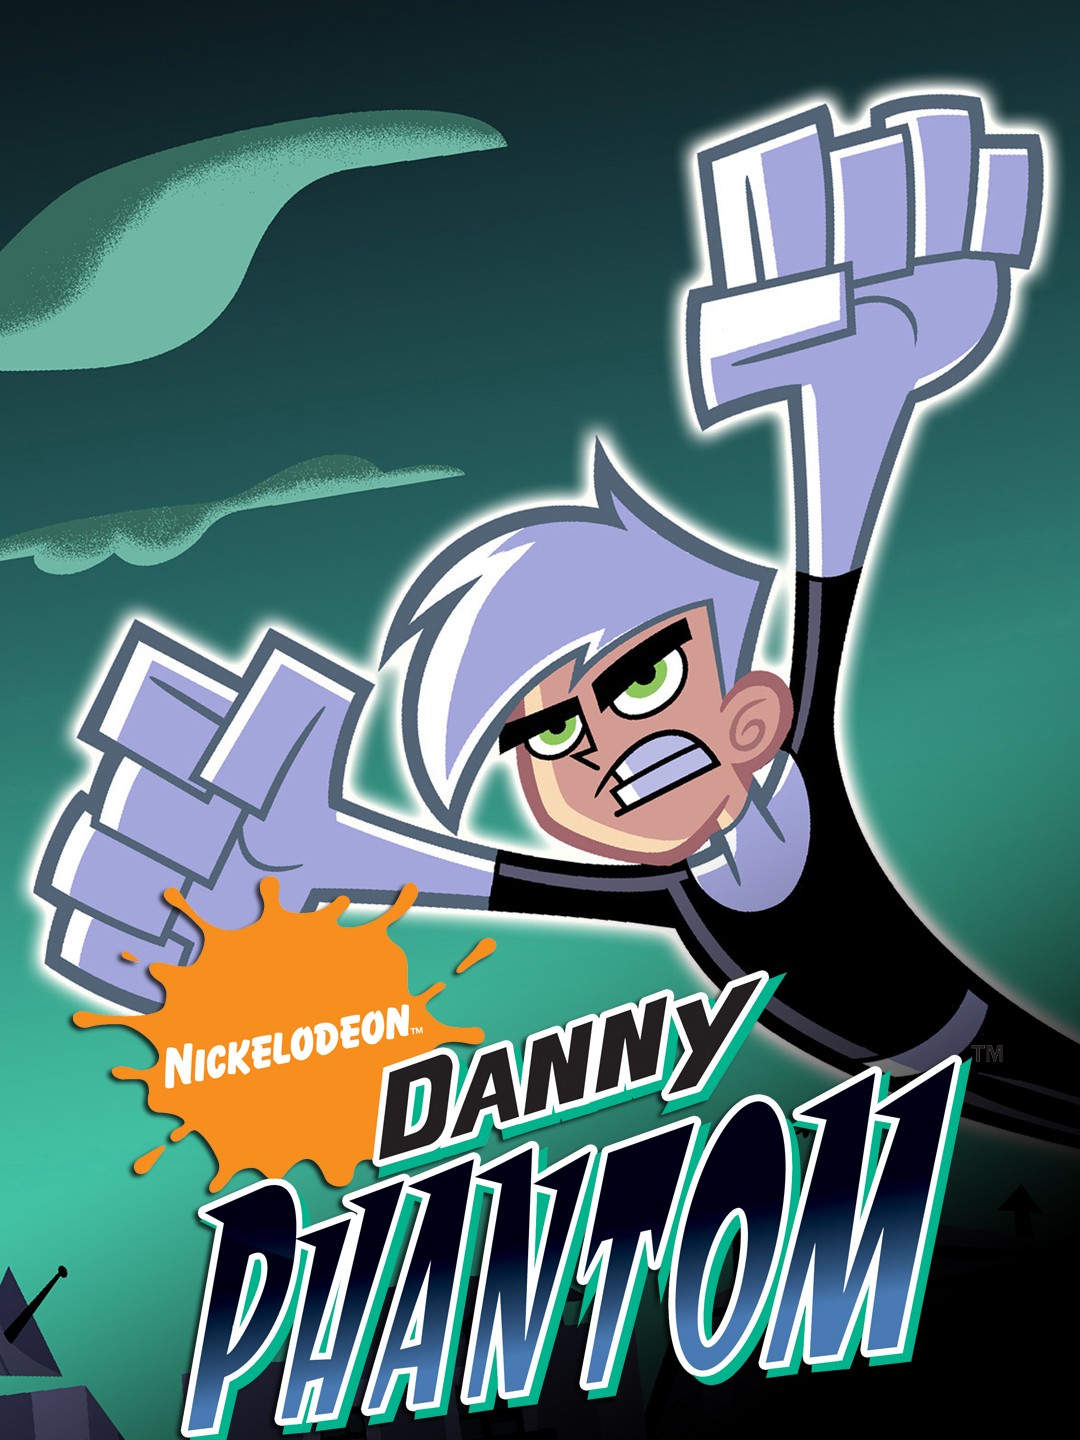 christine sarkissian recommends Where Can I Watch Danny Phantom